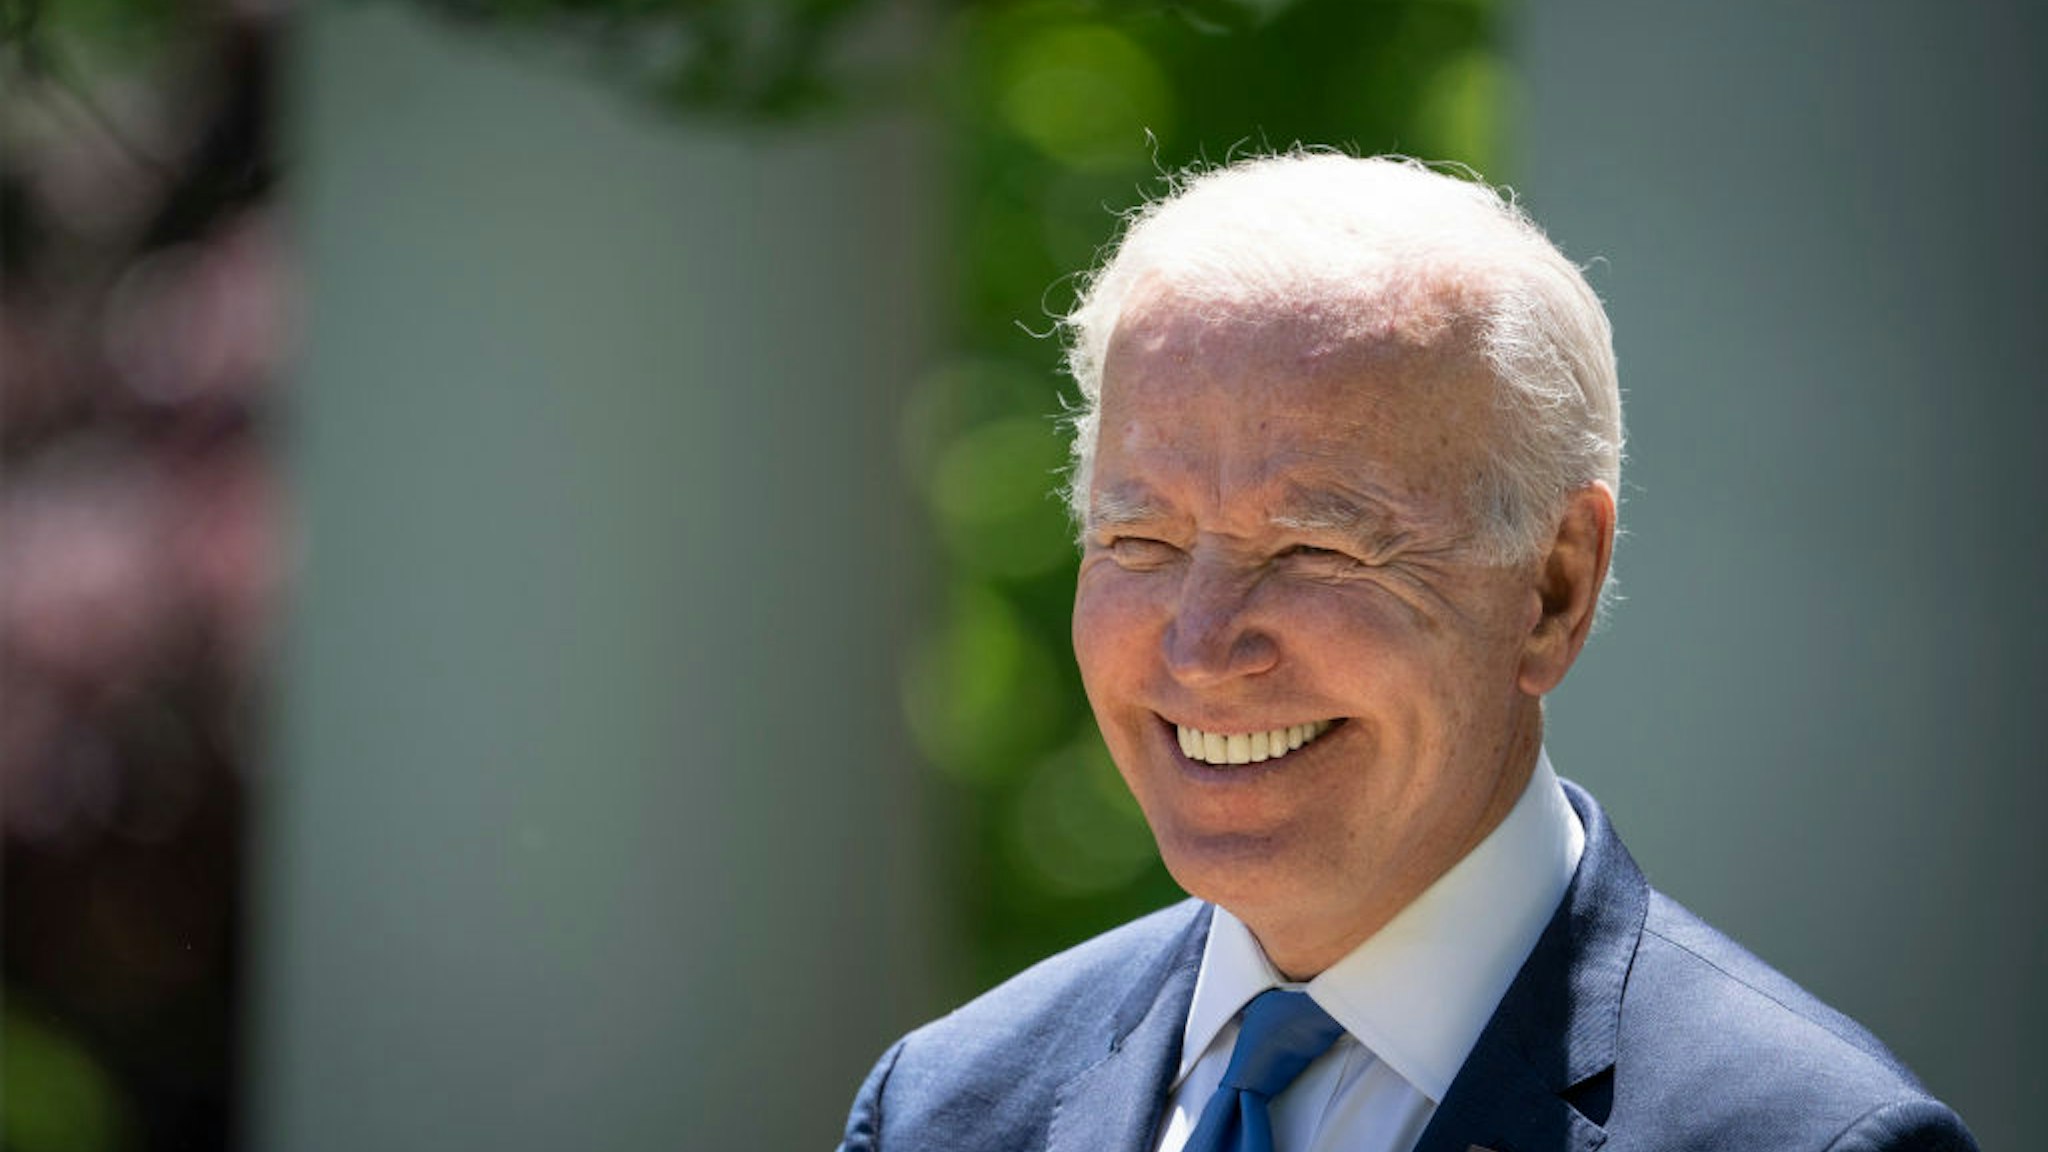 WASHINGTON, DC - MAY 9: U.S. President Joe Biden smiles during an event on high speed internet access for low-income Americans, in the Rose Garden of the White House May 9, 2022 in Washington, DC. The Biden administration announced on Monday that it will partner with internet service providers to lower the cost of high speed internet plans for low-income Americans as part of the Affordable Connectivity Program. The plan would provide high speed internet for no more than $30 a month and an estimated 48 million Americans would qualify. (Photo by Drew Angerer/Getty Images)